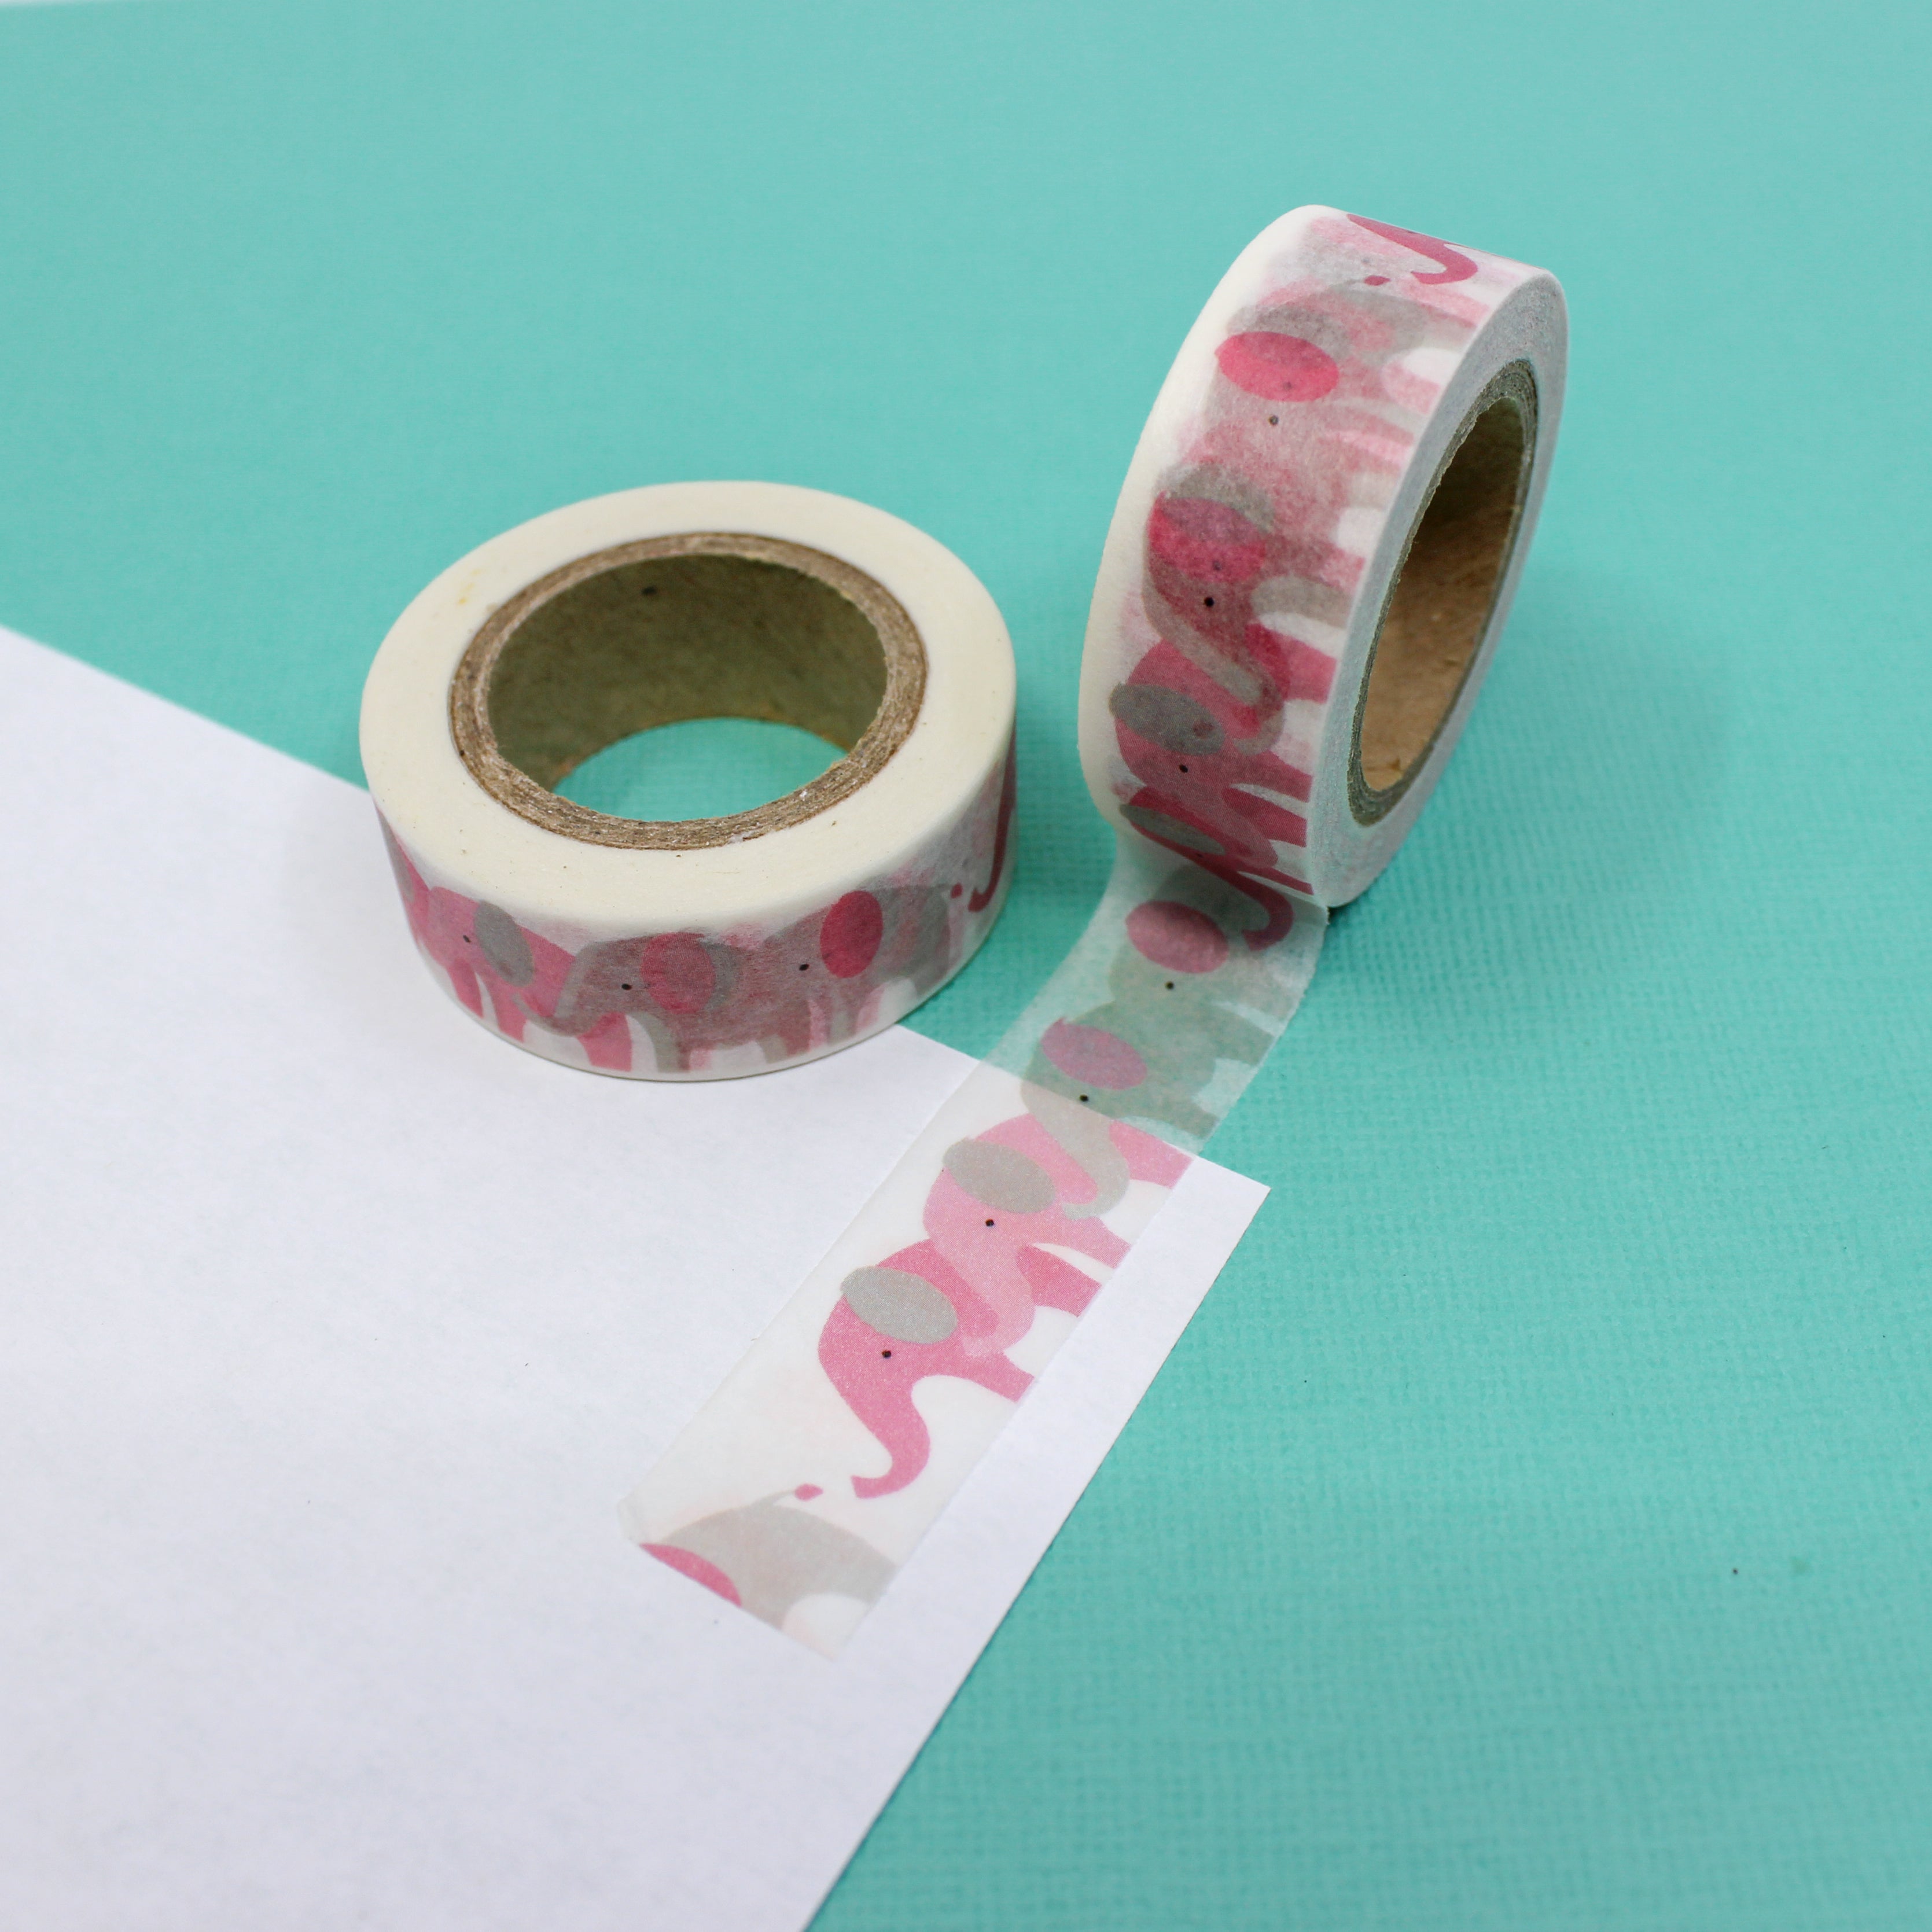 This is a color pink and grey elephants view themed washi tape from BBB Supplies Craft Shop